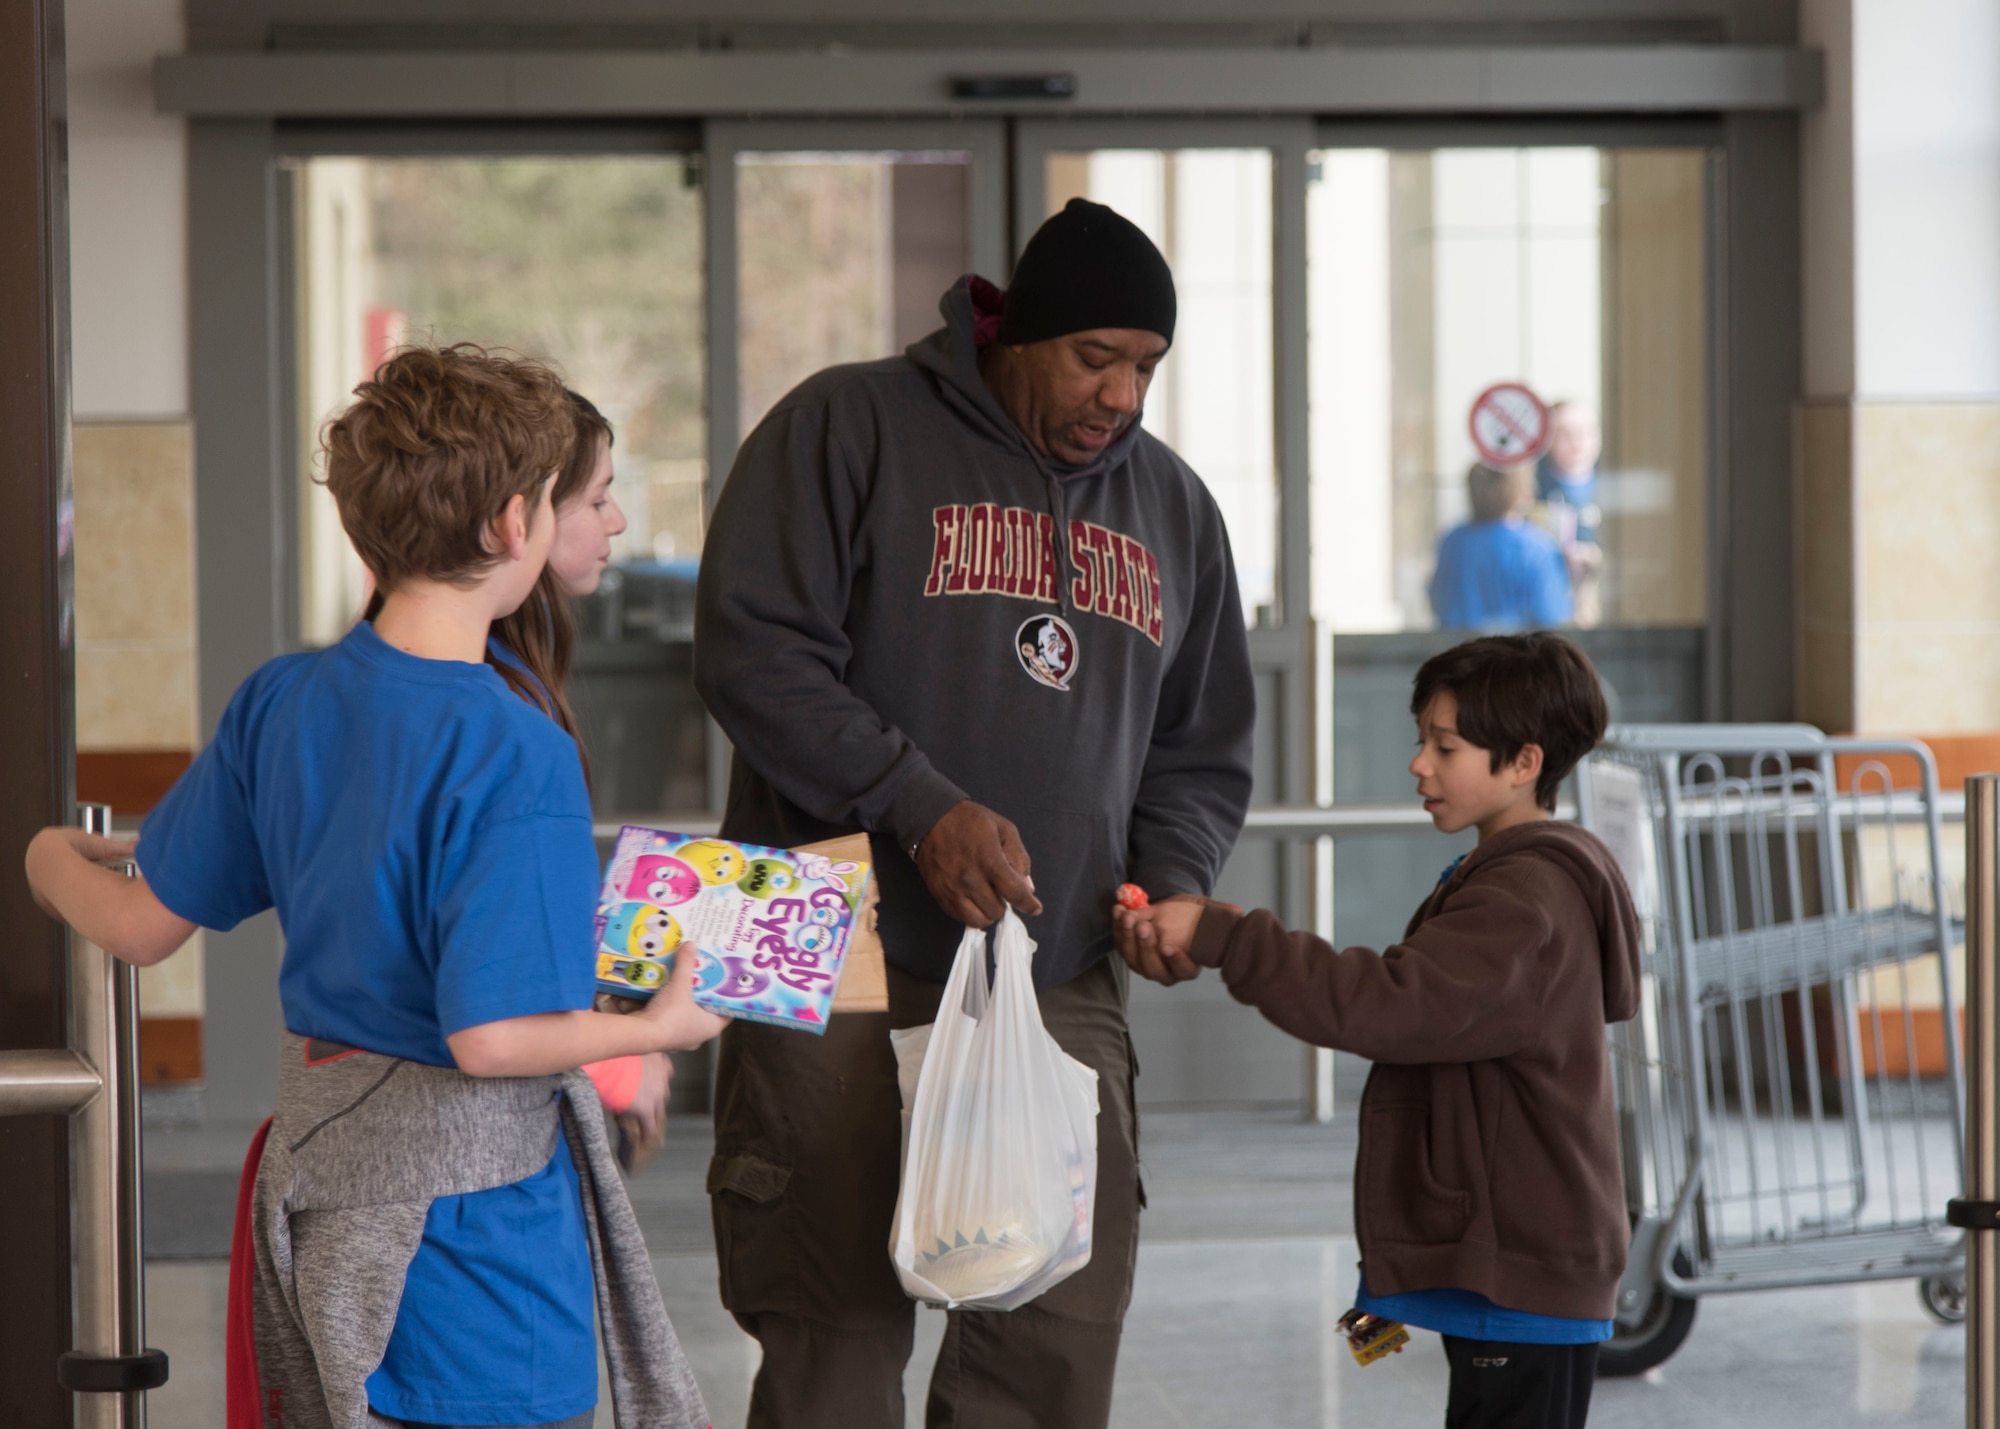 Members of Ramstein’s Boys and Girls Club of America Torch Club give candy to a commissary customer in efforts to give back on Ramstein Air Base, Germany, March 7, 2018. Seeds of Kindness, the Torch Club’s national project, was an opportunity for members of the Torch Club to give to people in the community. (U.S. Air Force photo by Airman 1st Class Kaylea Berry)